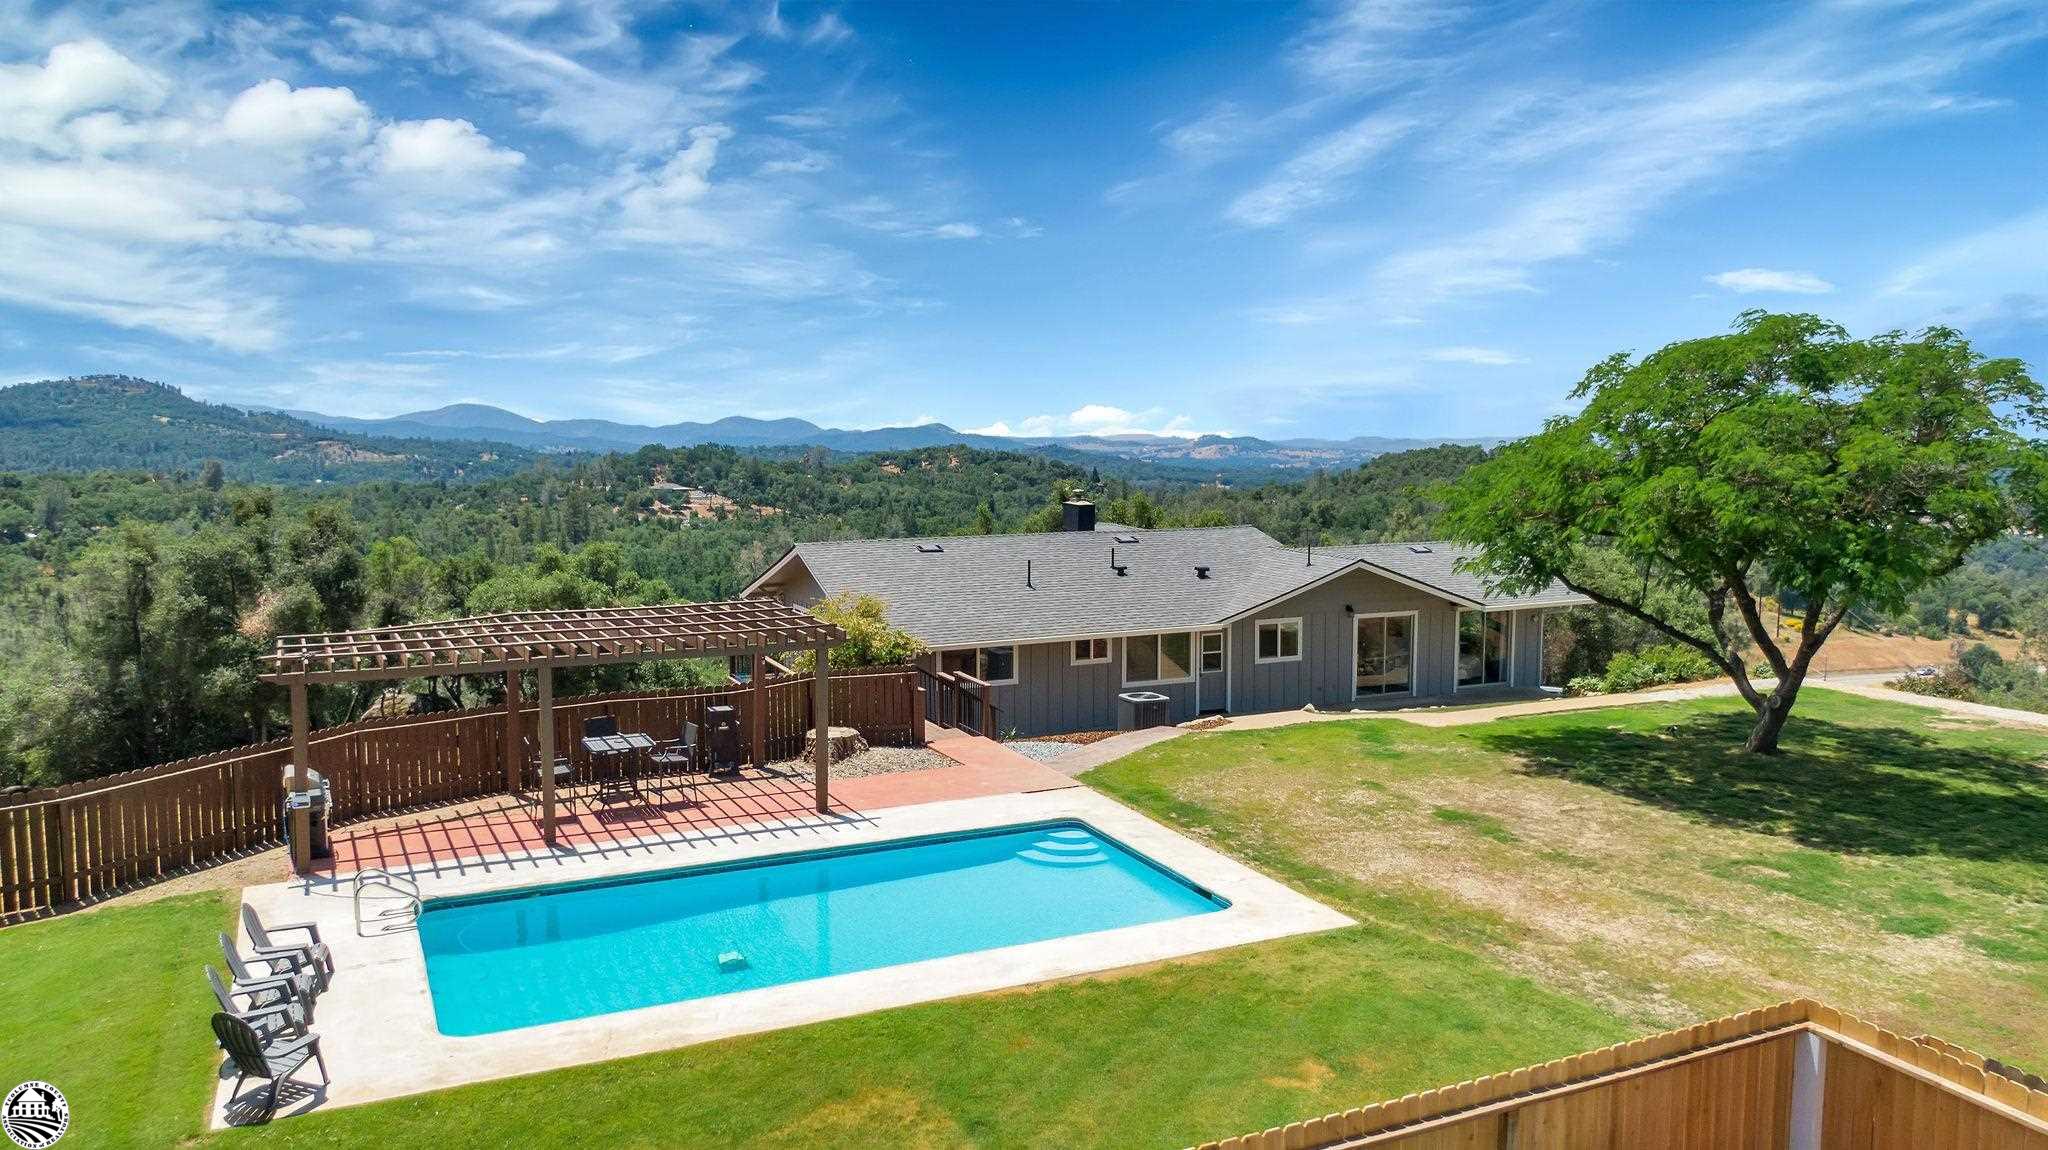 Open house - Sunday, June 11th from 12:00pm - 2:00 pm.  Buyers to show qualification proof before entering property.   Poolside Sunsets with Breathtaking Panoramic Views! 19960 Tin Man Lane is a 2439sq.ft. forever home with 2 master suites, 2 more guest bedrooms, 3 full baths, a 4+ car garage with a mancave area, a perfect for wine cellar storage basement room and all situated on 10.77 private acres. Lots of remodeling and updates with a newer kitchen, roof with seamless gutters, flooring, central heat and AC, an Aqua-Tech well filtration system, 4 year old decks and railings and a new pool filter and sweep. There is fresh paint inside and out and almost all new windows. Most electrical and plumbing has been updated and the resurfaced pool with a shade pergola is so inviting you will never want to leave. The all electric kitchen is equipped with stainless steel appliances, granite counter tops and an eating bar for gathering at mealtime. There are huge picture windows in the spacious living room to capture the valley views, sunsets and city lights. Perfect for holiday gatherings to cozy up in front of the wood burning fireplace insert . You with love the entry level master suite with a large remodeled bath tile and stone shower. It is 1 of 2 master bedrooms, so a good setup for multi family or generational clean mountain living. The property has been graded with a nice spot for a horse setup, the driveway has a newer seal coat and there is a fenced garden area. The detached shop building is about 700sq. ft. and just right for an additional dwelling unit conversion and there is lots of level equipment or RV parking.  This very commuter convenient homestead is about 2.5 hours from most Bay Area locations. Just minutes to Yosemite National Park, Pinecrest Lake Resort, Dodge Ridge Ski Resort, New Melones Reservoir, Don Pedro Lake, Columbia Airport and State Park Trails, Restaurants, Shopping and Relaxing under the stars.